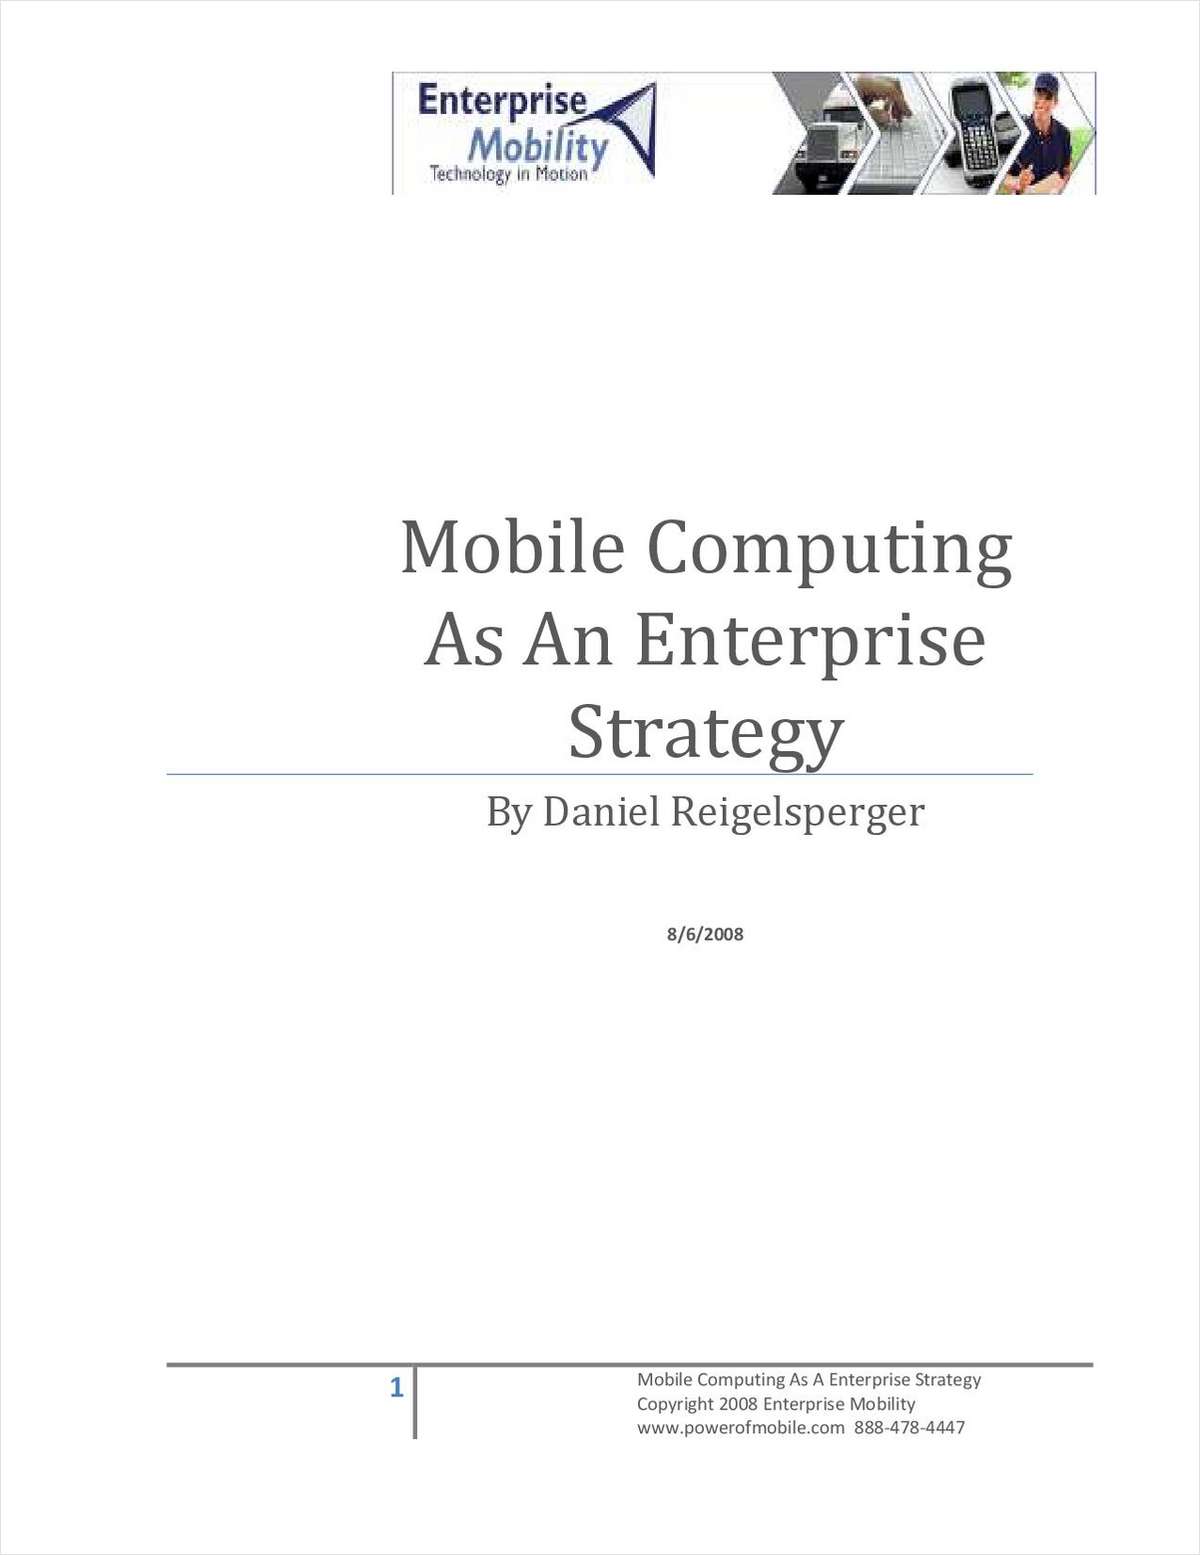 Mobile Computing as a Strategy